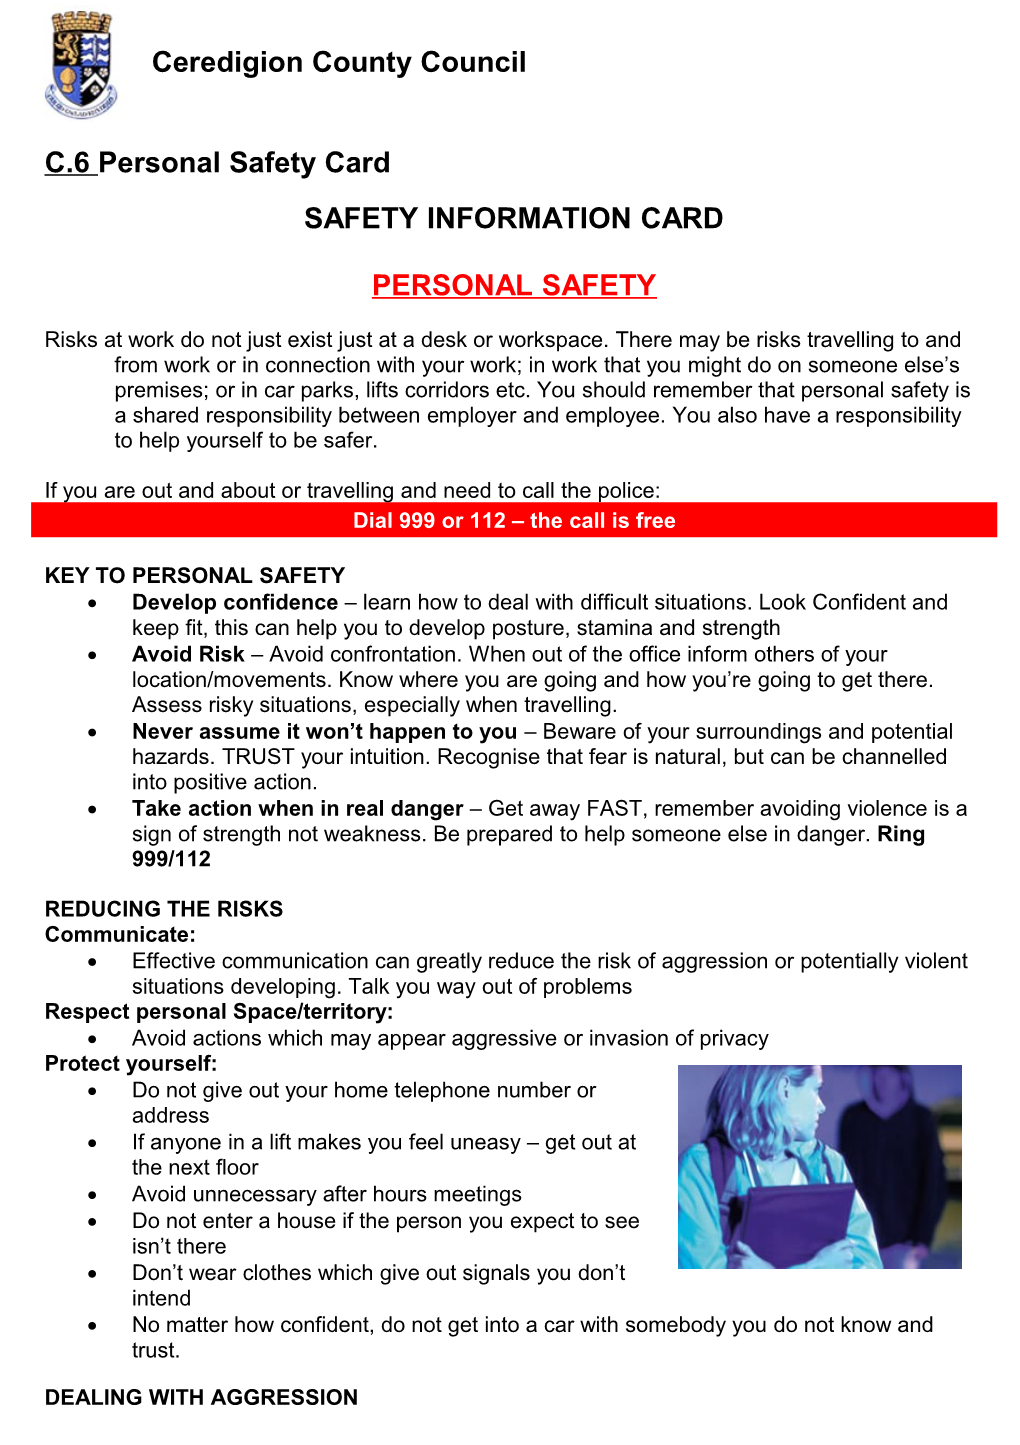 C.6Personal Safety Card